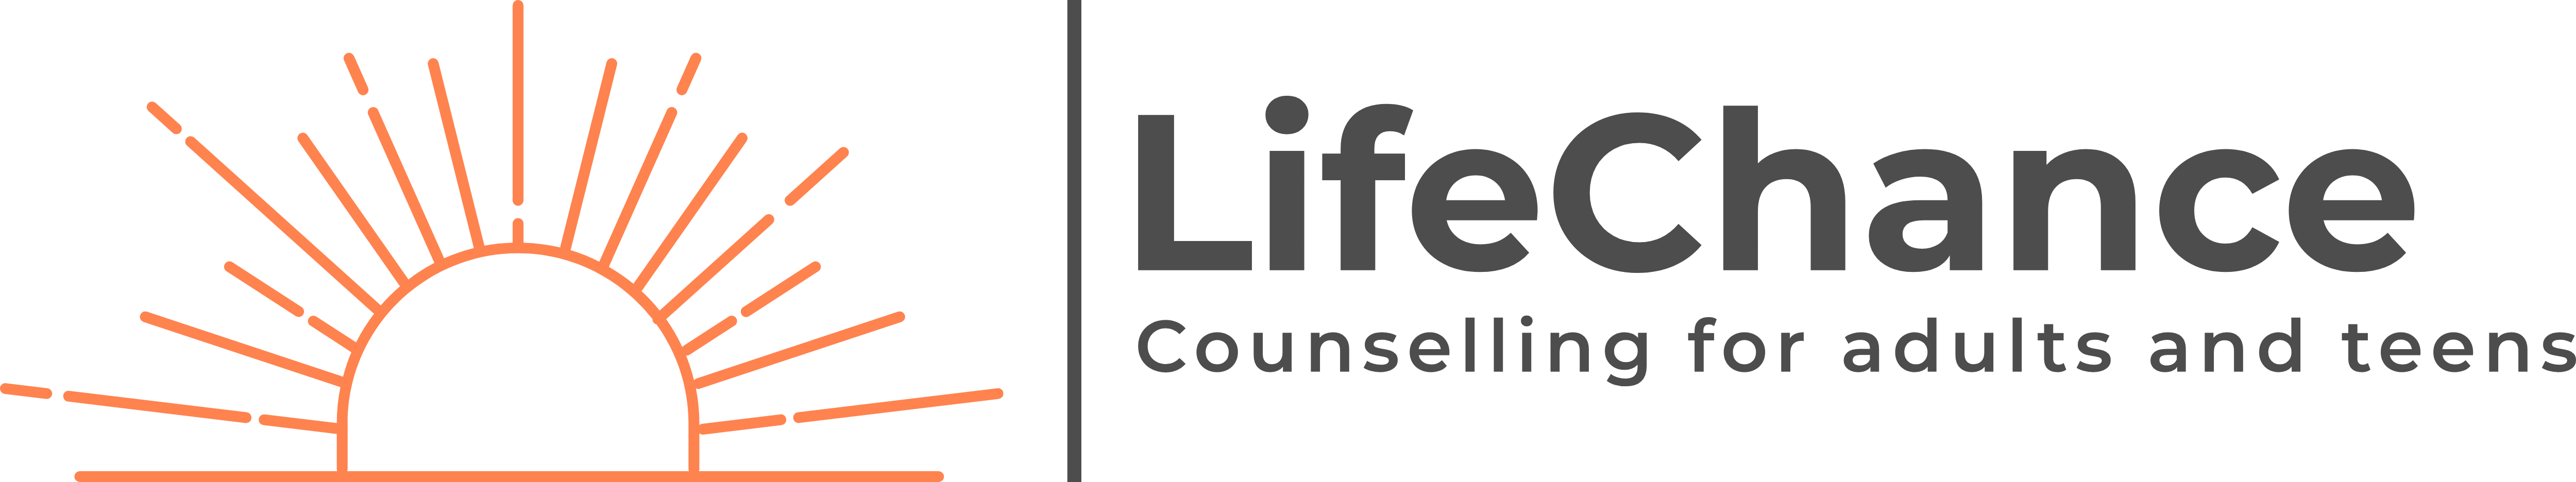 LifeChance Counselling and Supervision